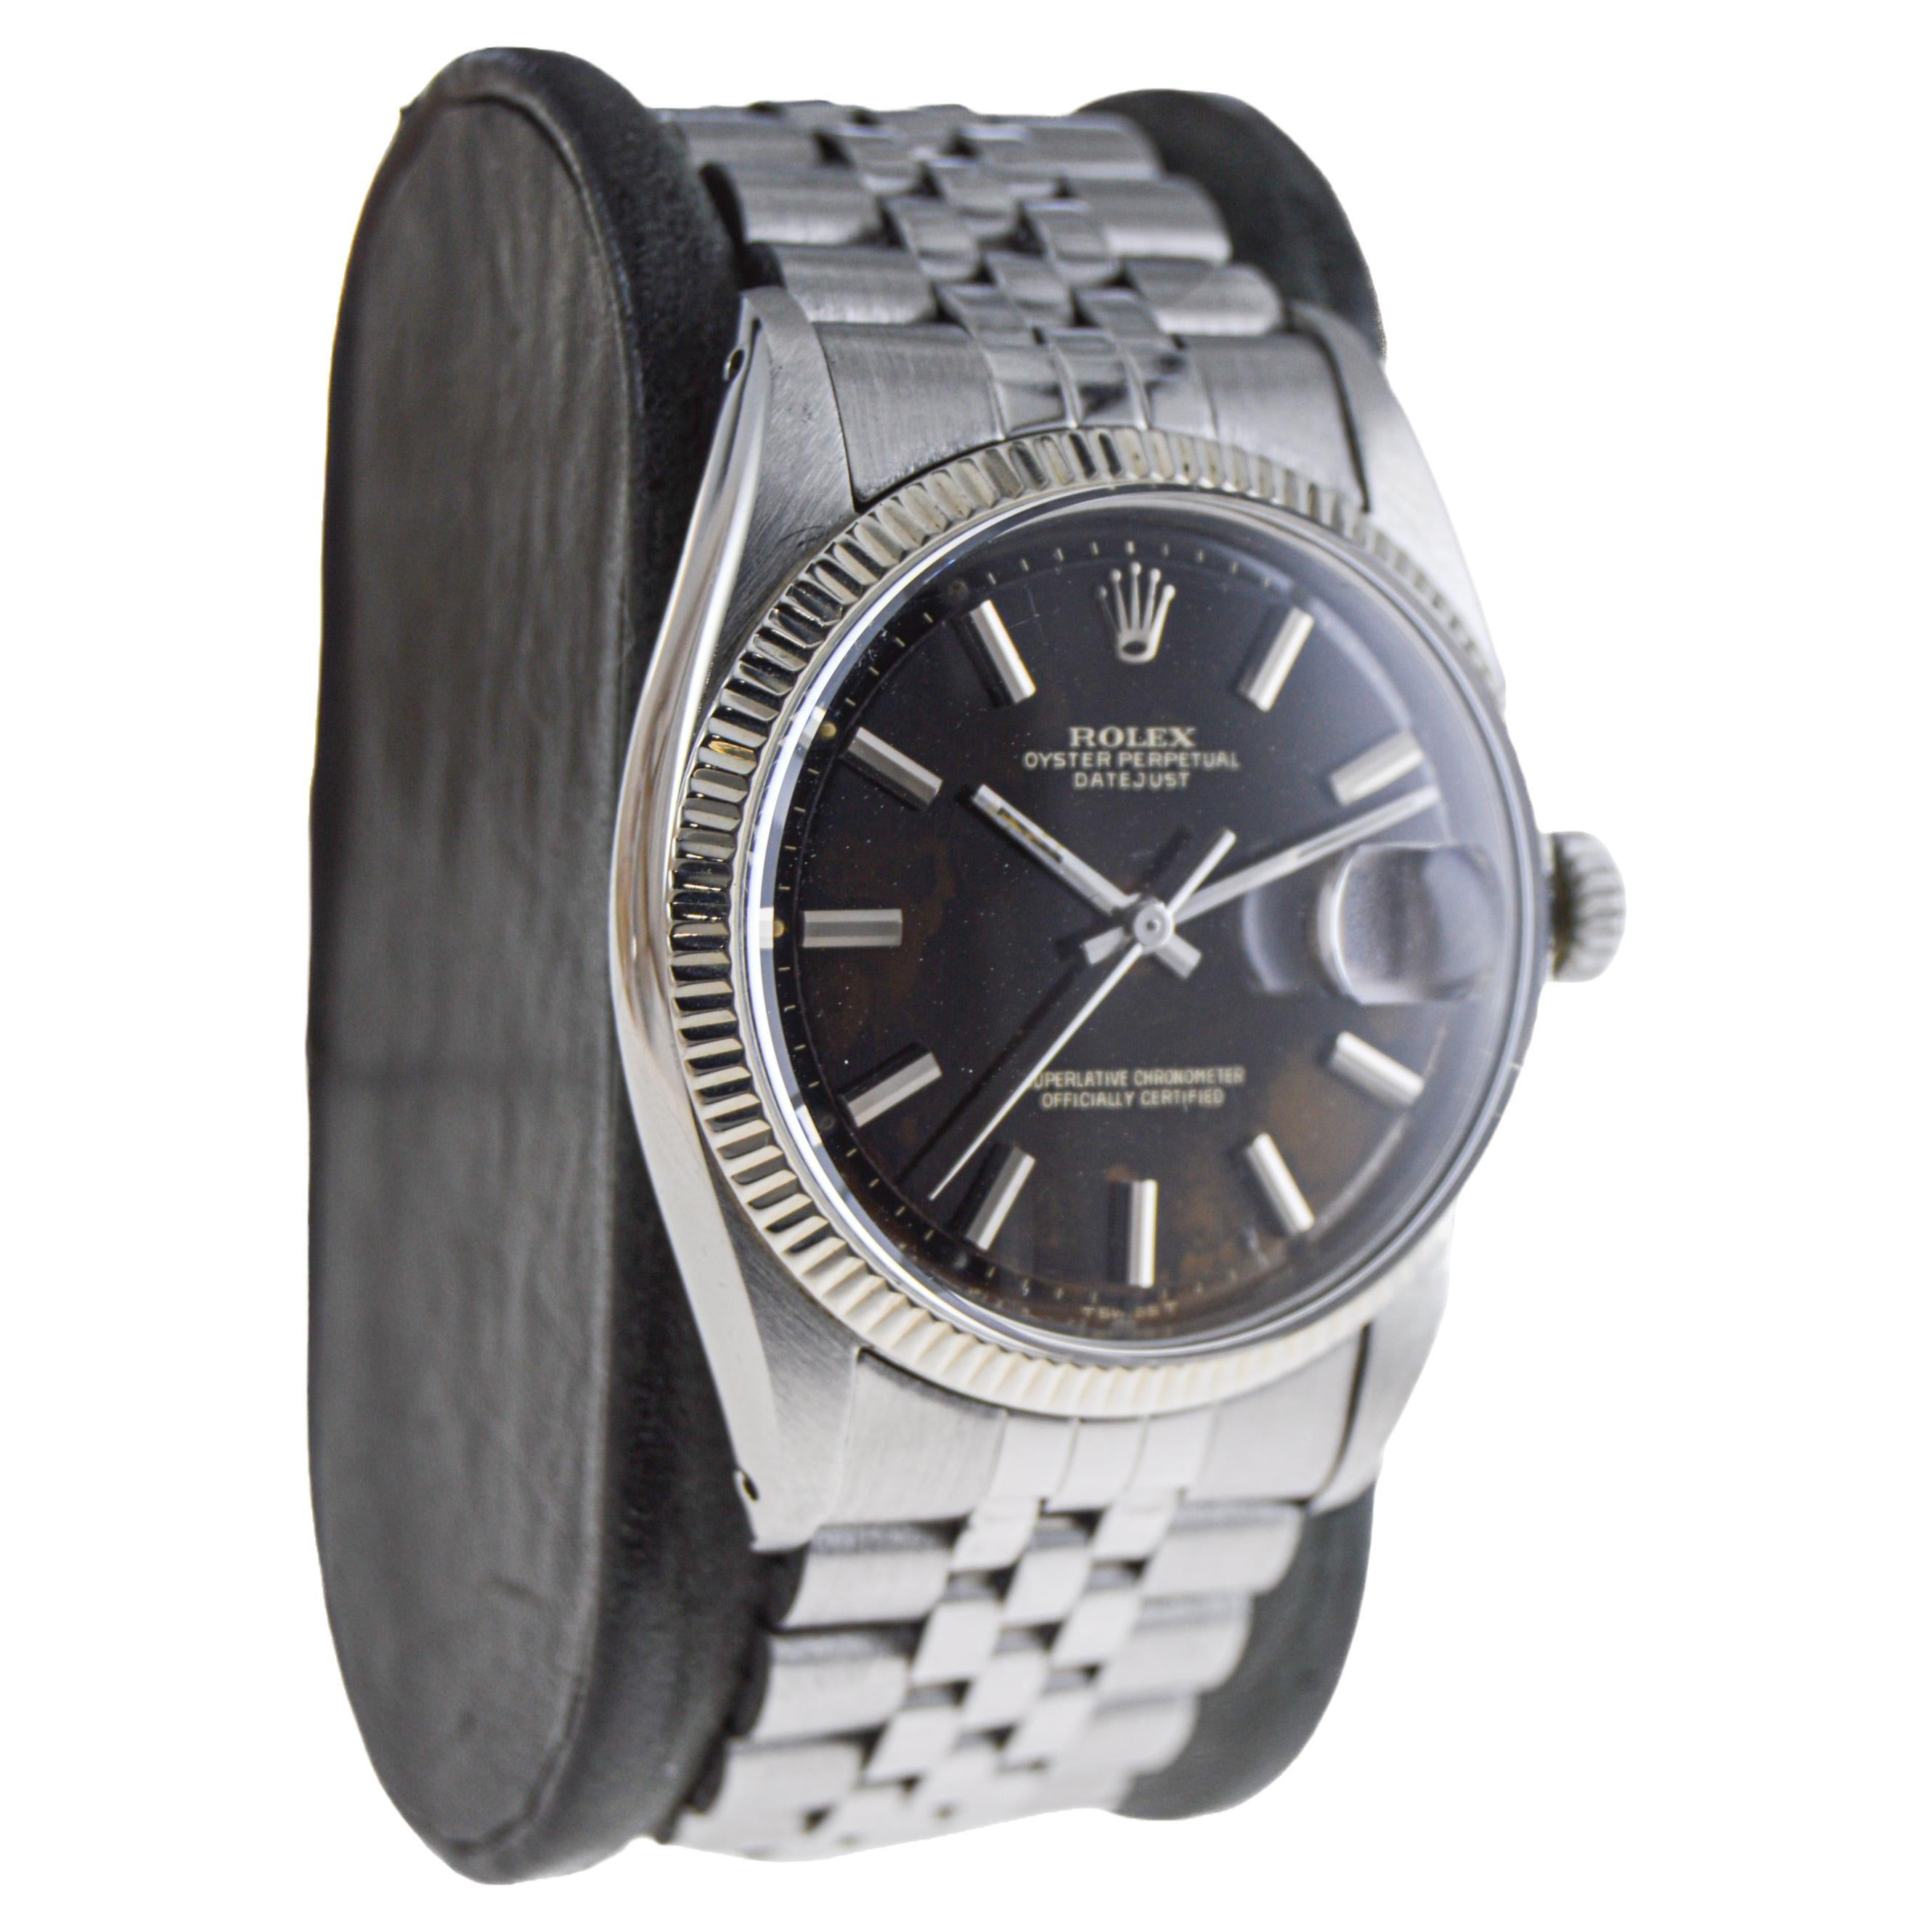 FACTORY / HOUSE: Rolex Watch Company
STYLE / REFERENCE: Oyster Perpetual Datejust / Reference 6605
METAL / MATERIAL: Stainless Steel
CIRCA / YEAR: 1958
DIMENSIONS / SIZE: Length 44mm X Diameter 36mm
MOVEMENT / CALIBER: Perpetual Winding / 25 Jewels